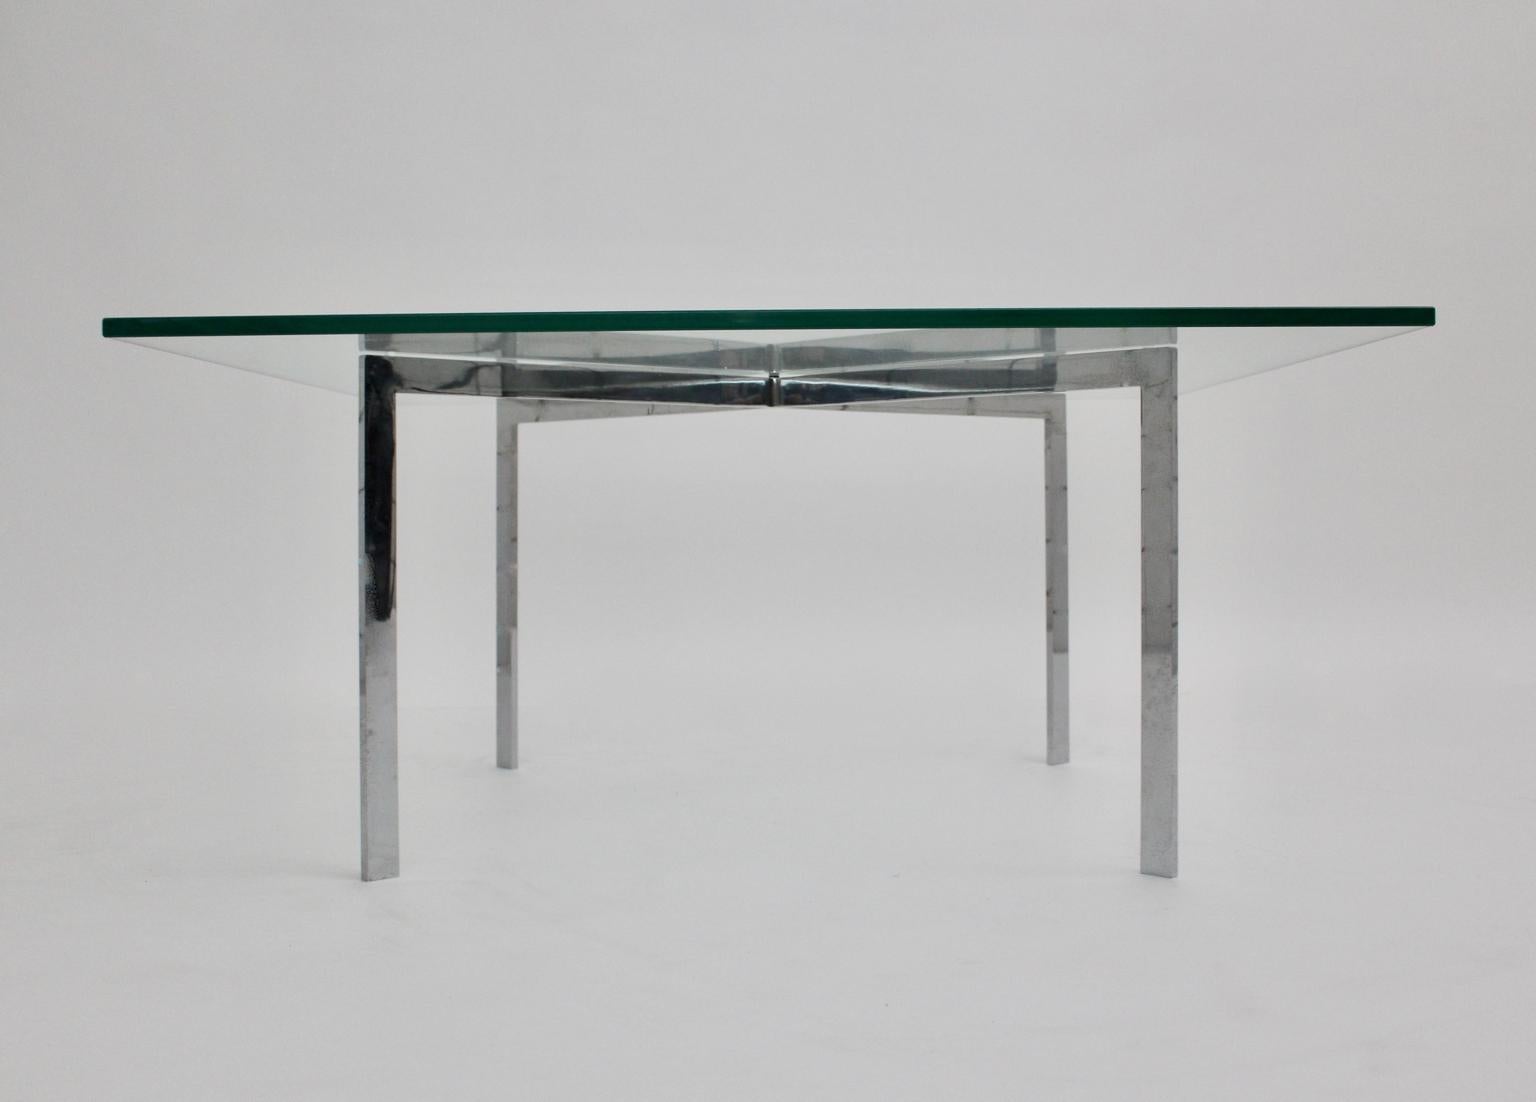 Bauhaus Vintage Chrome Glass Coffee Table Barcelona by Mies van der Rohe, 1929 For Sale 1